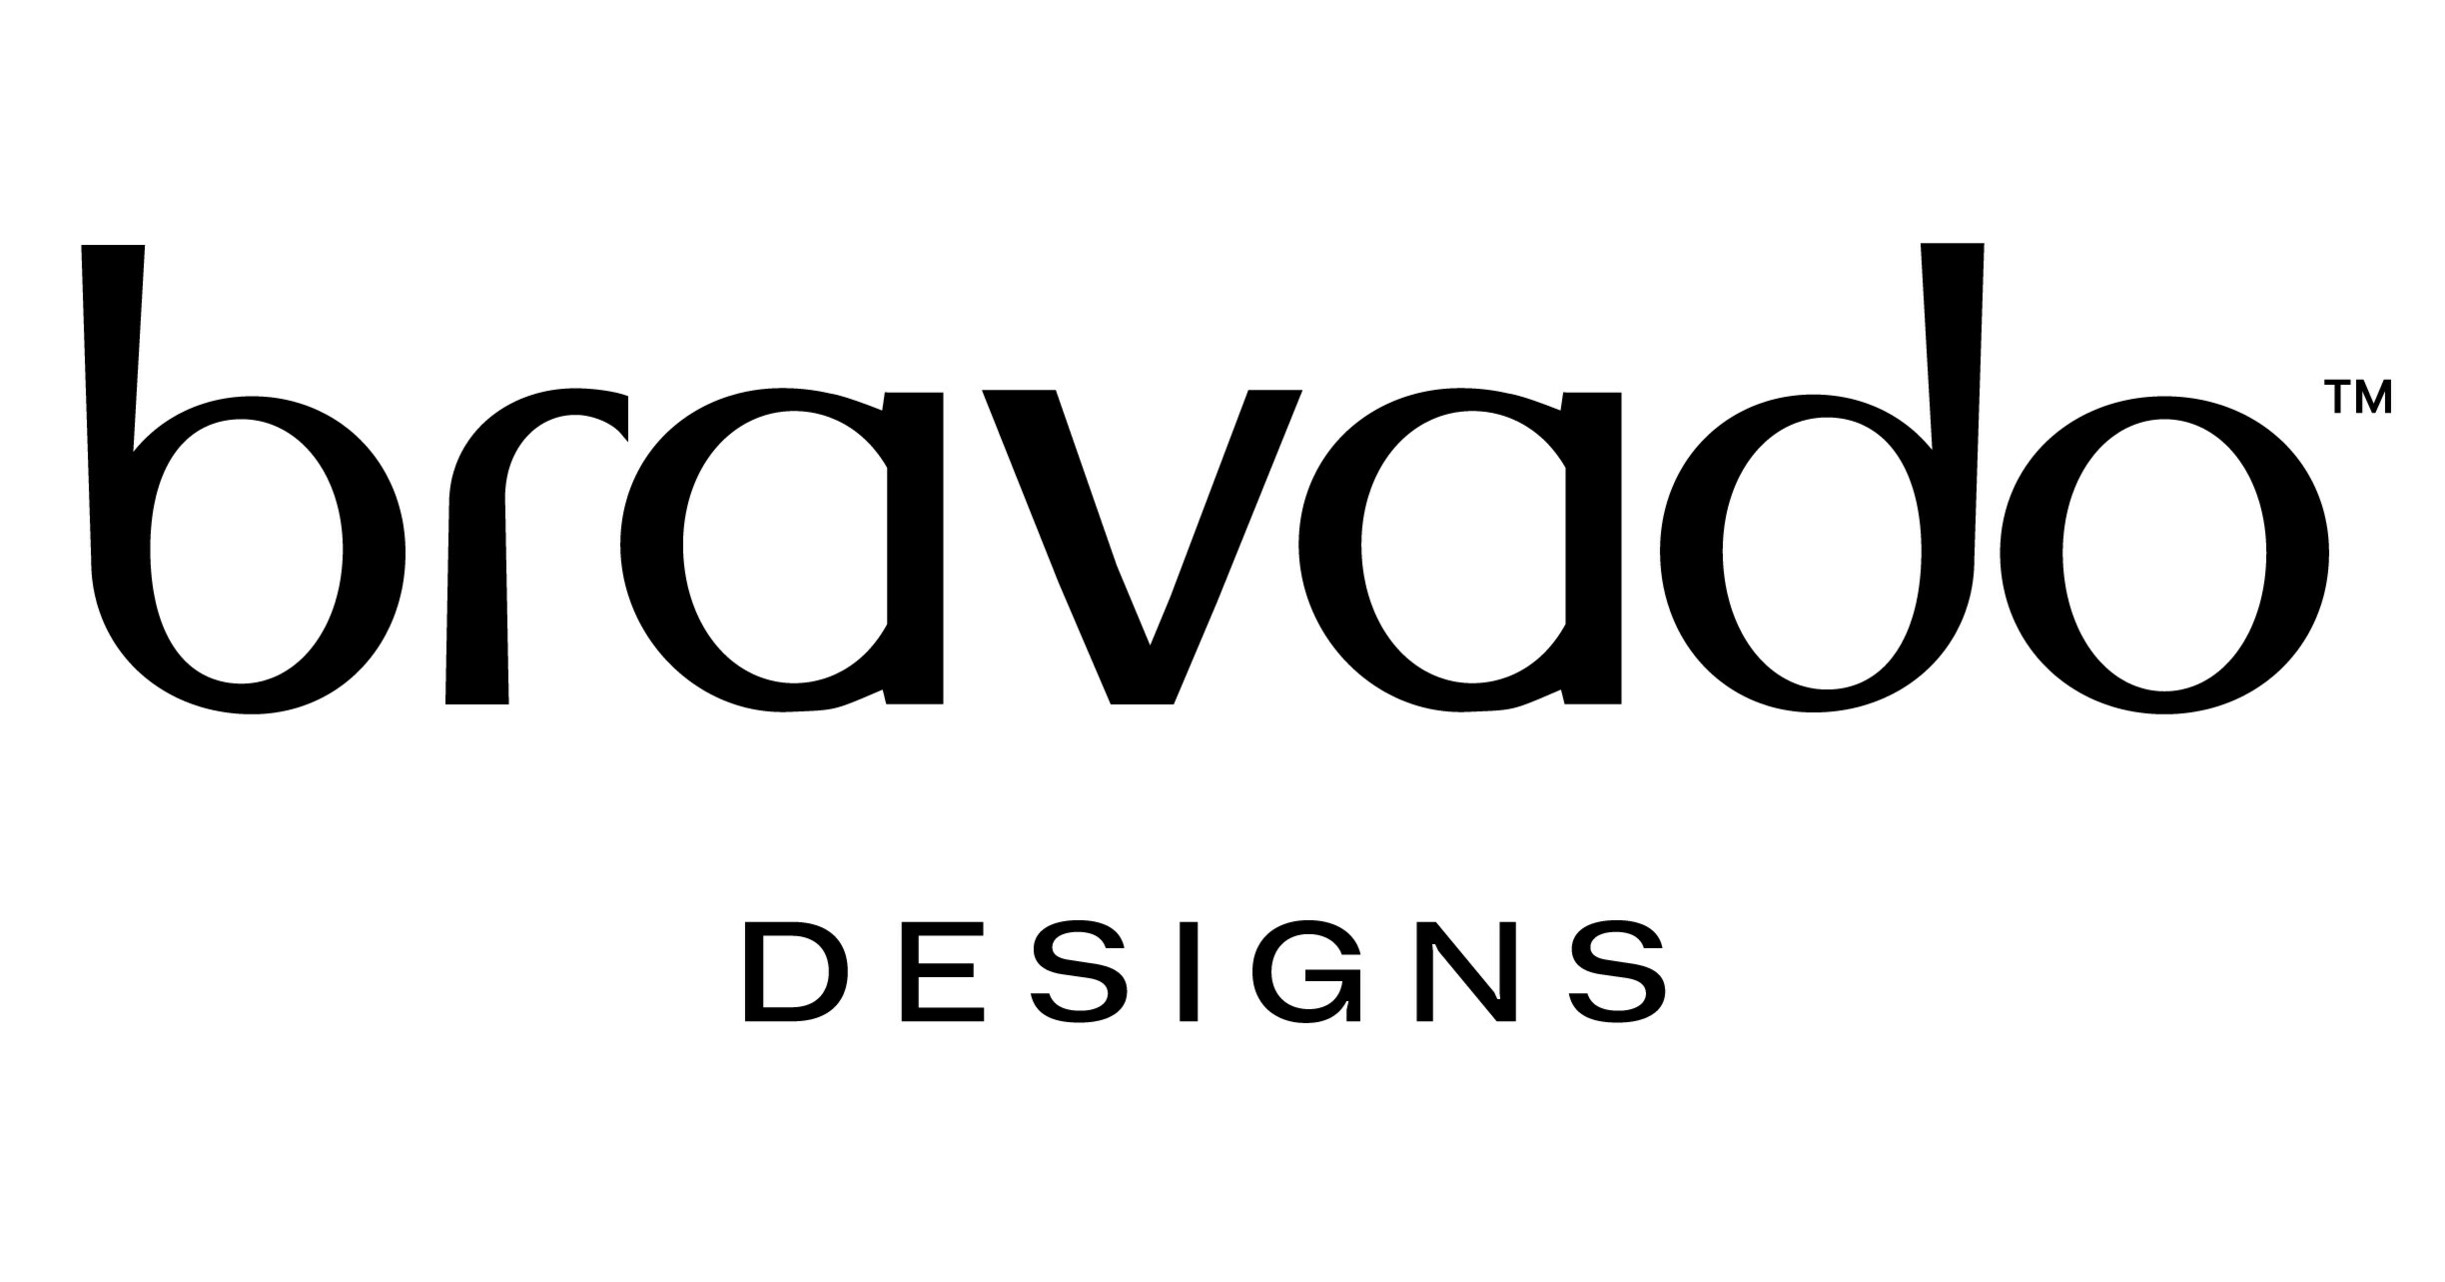 Bravado Designs Launches Rebrand & Expansion After 30 Years of Shaping ...